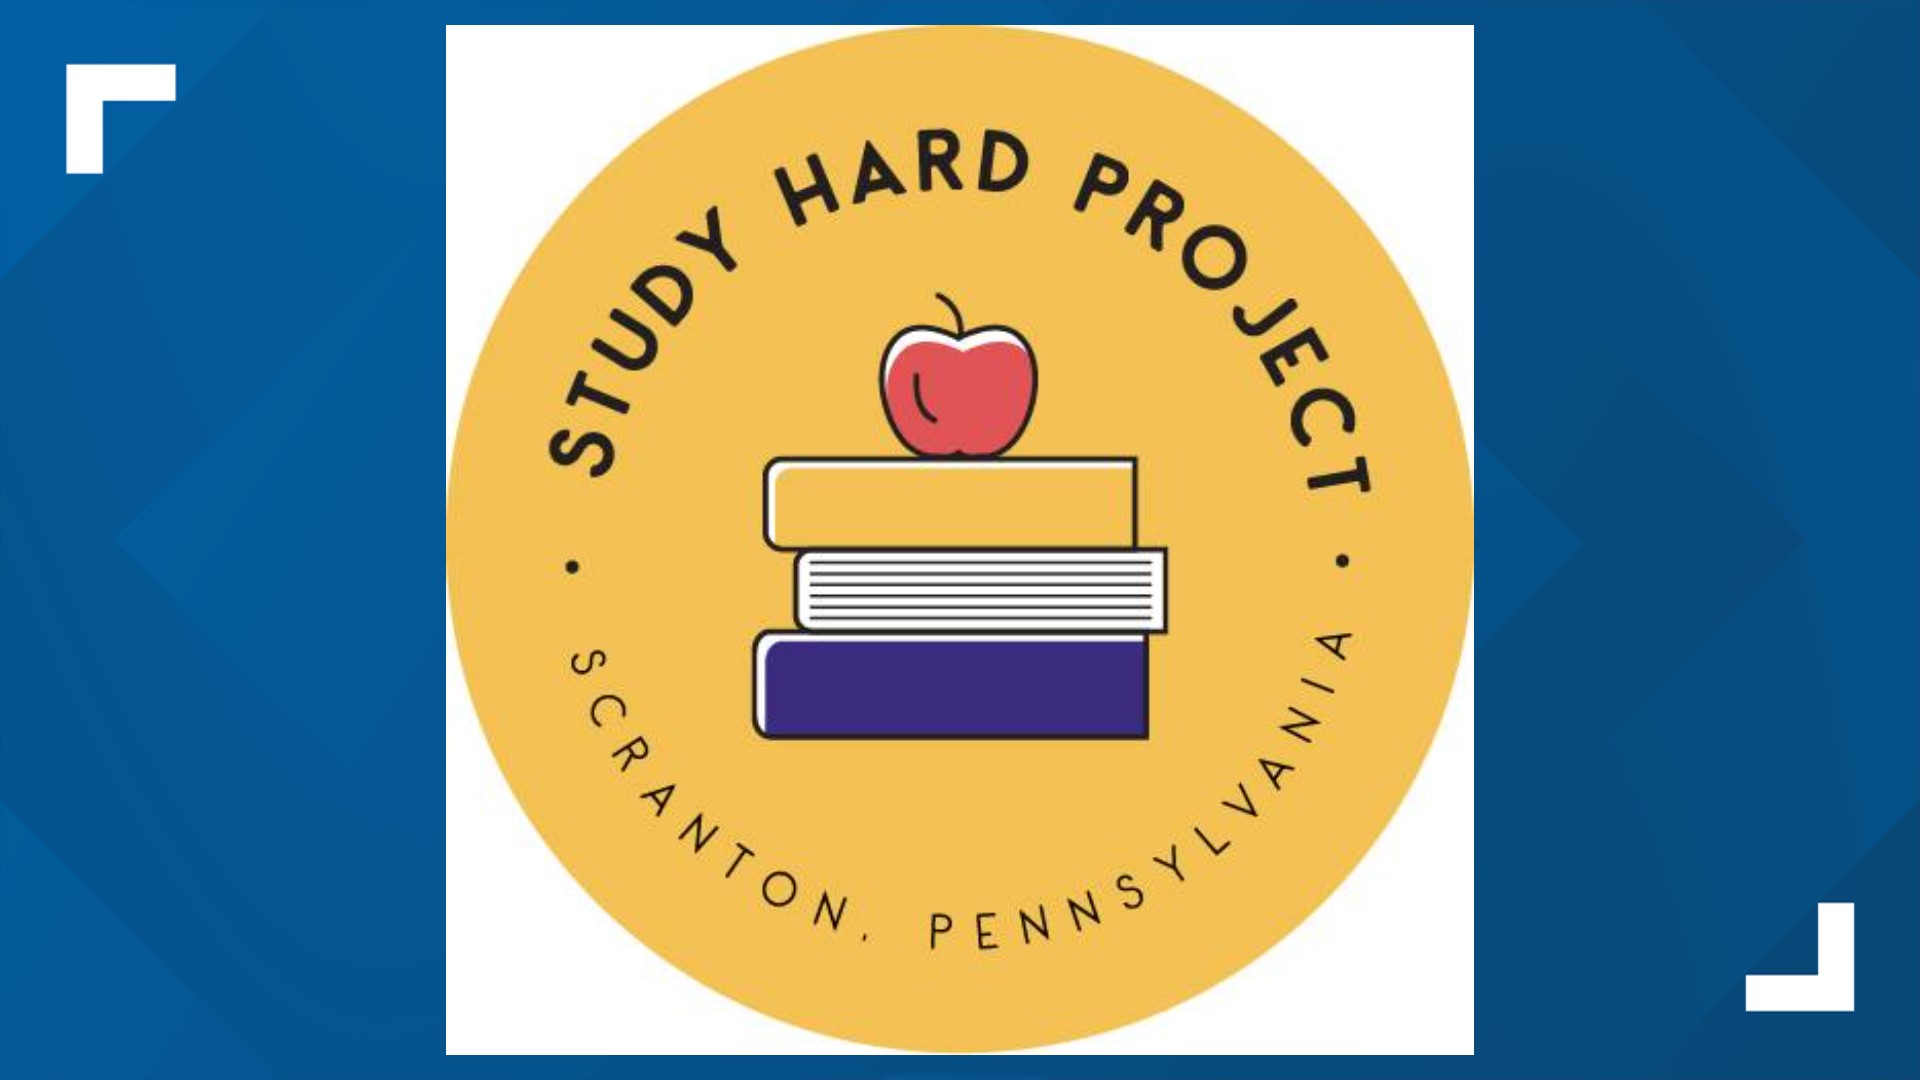 The Study Hard Project helps middle and high school students in our area meet their academic potential one free study session at a time.